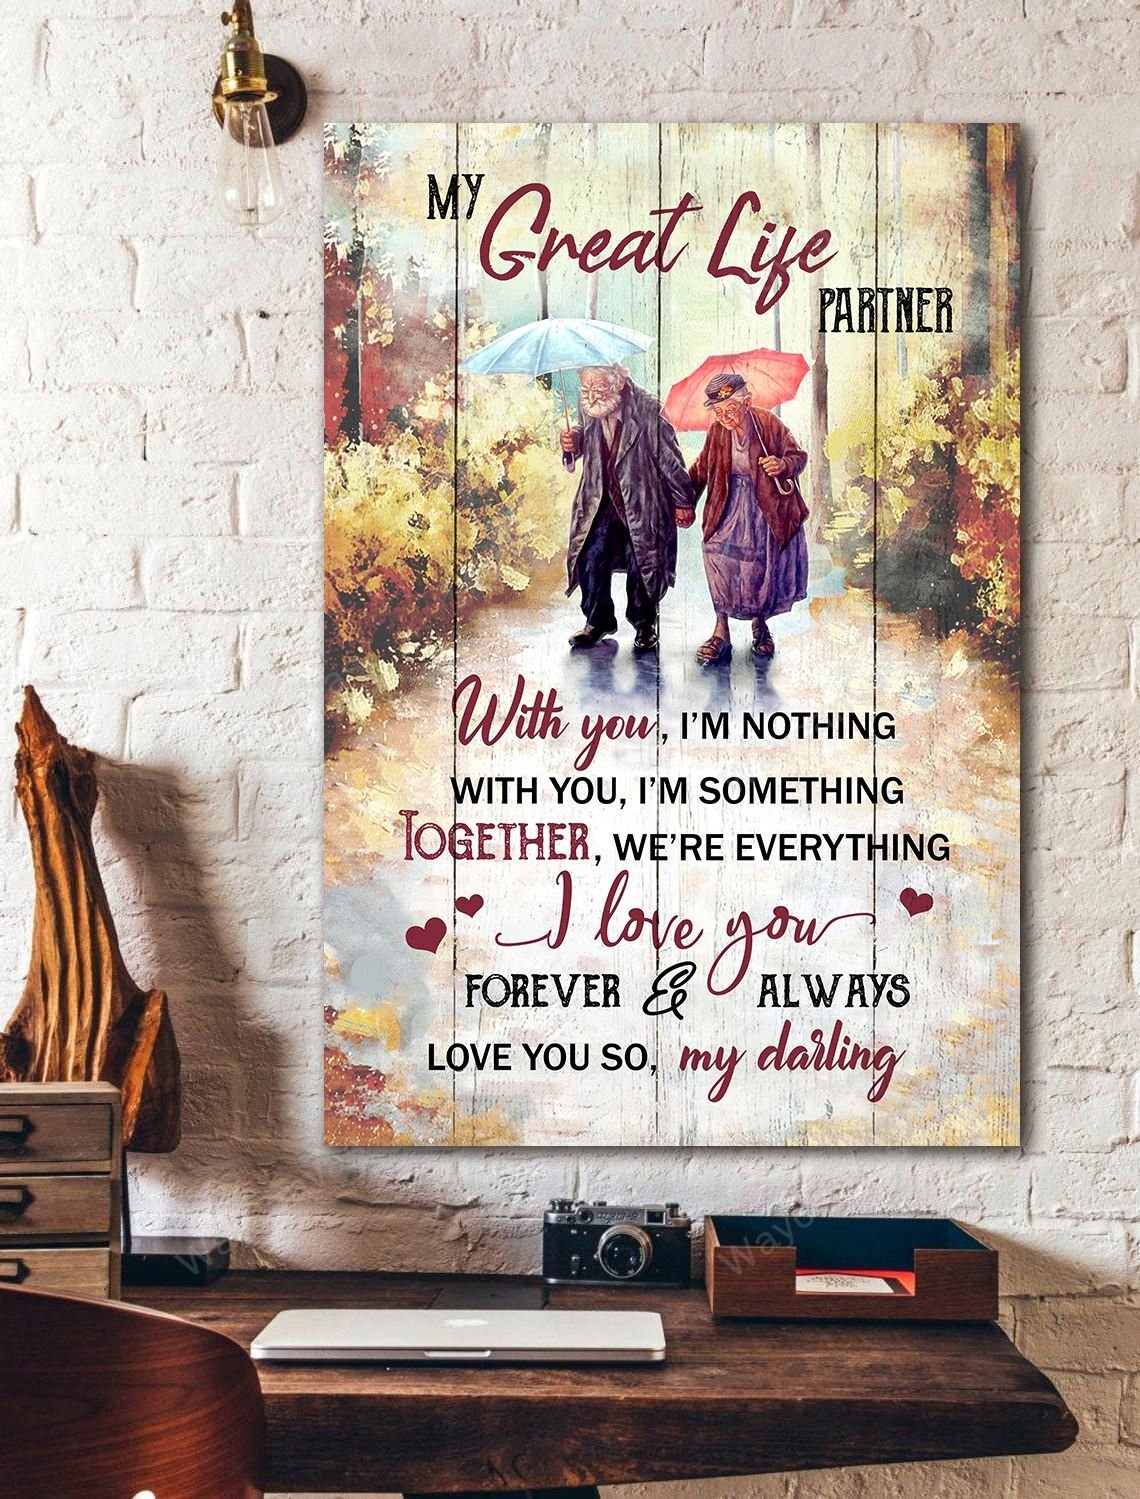 Old couple walking, Umbrella drawing, Autumn forest, I love you forever & always - Couple Portrait Canvas Prints, Wall Art